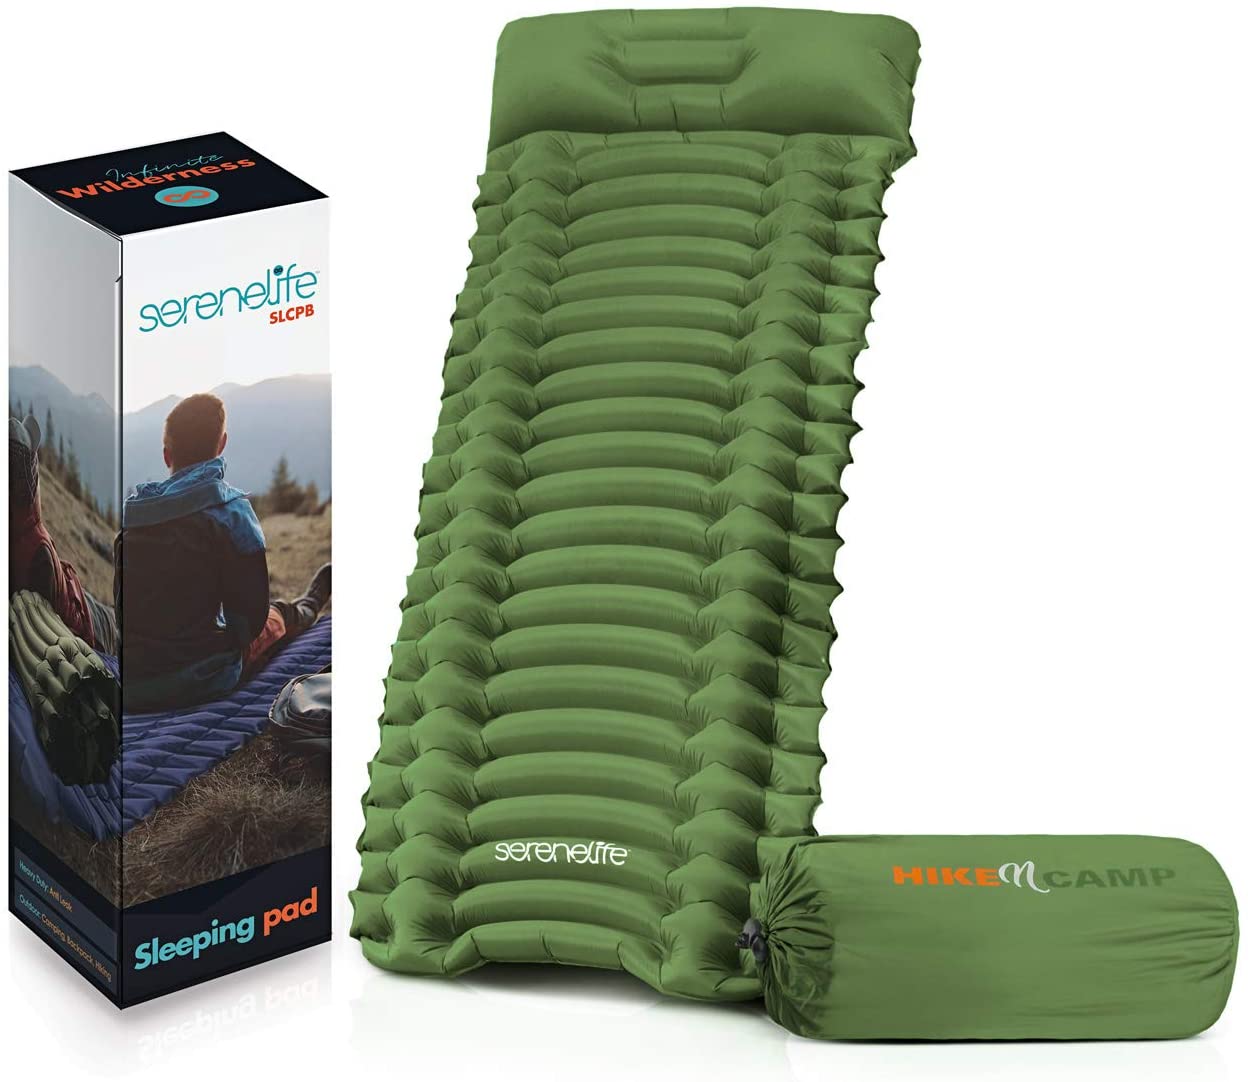 This air mattress is self-inflating, lightweight, waterproof, and rolls up into a compact carry bag for extra portability, making it perfect for backpacking.